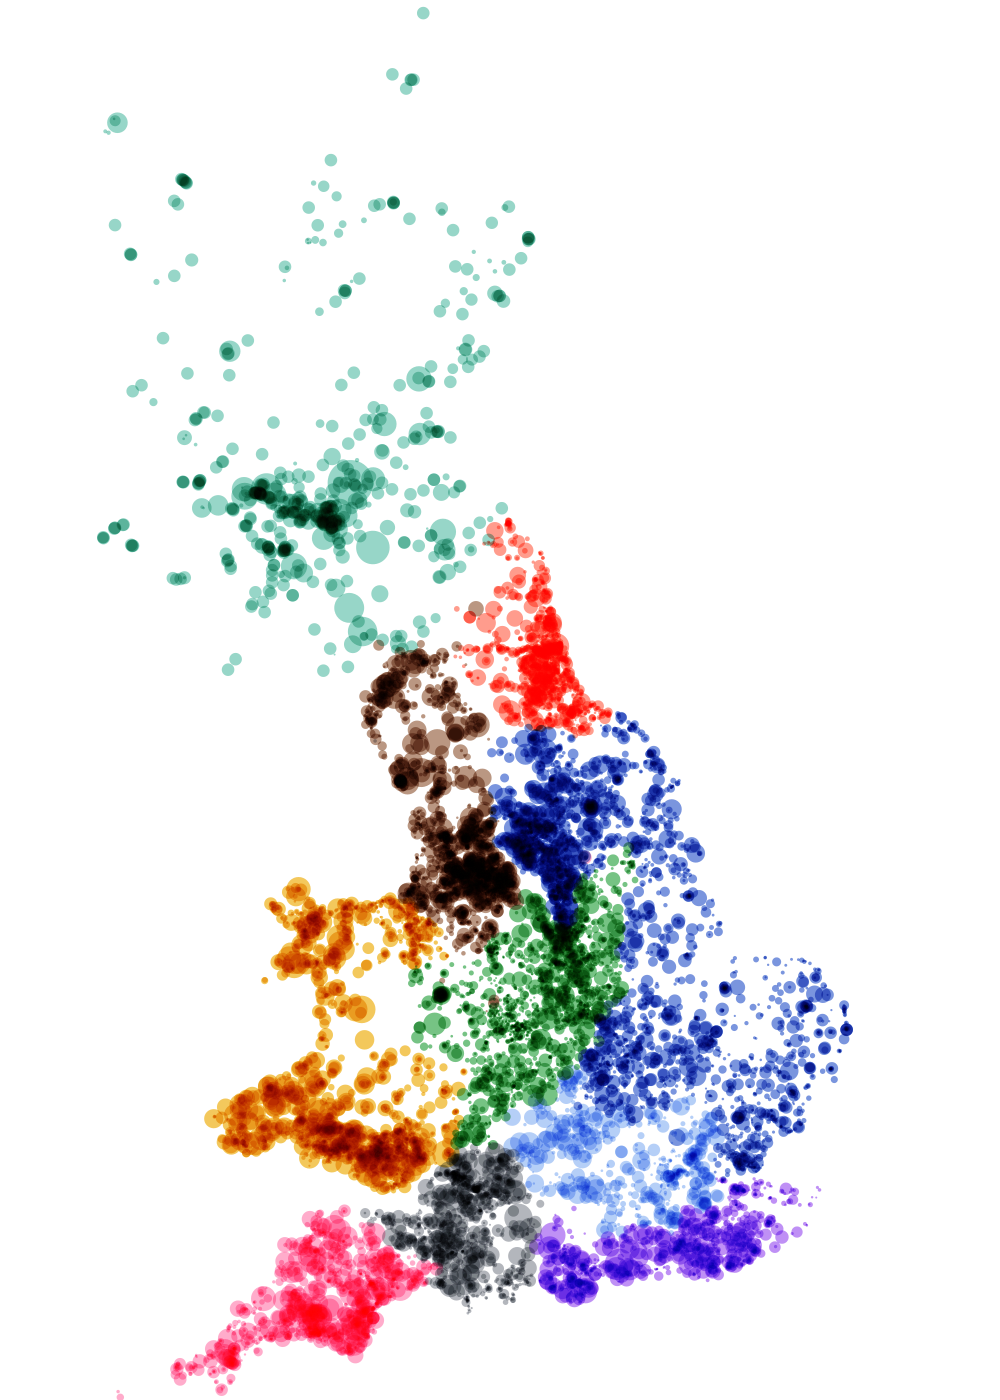 A stylised map of England and Wales showing CSO locations